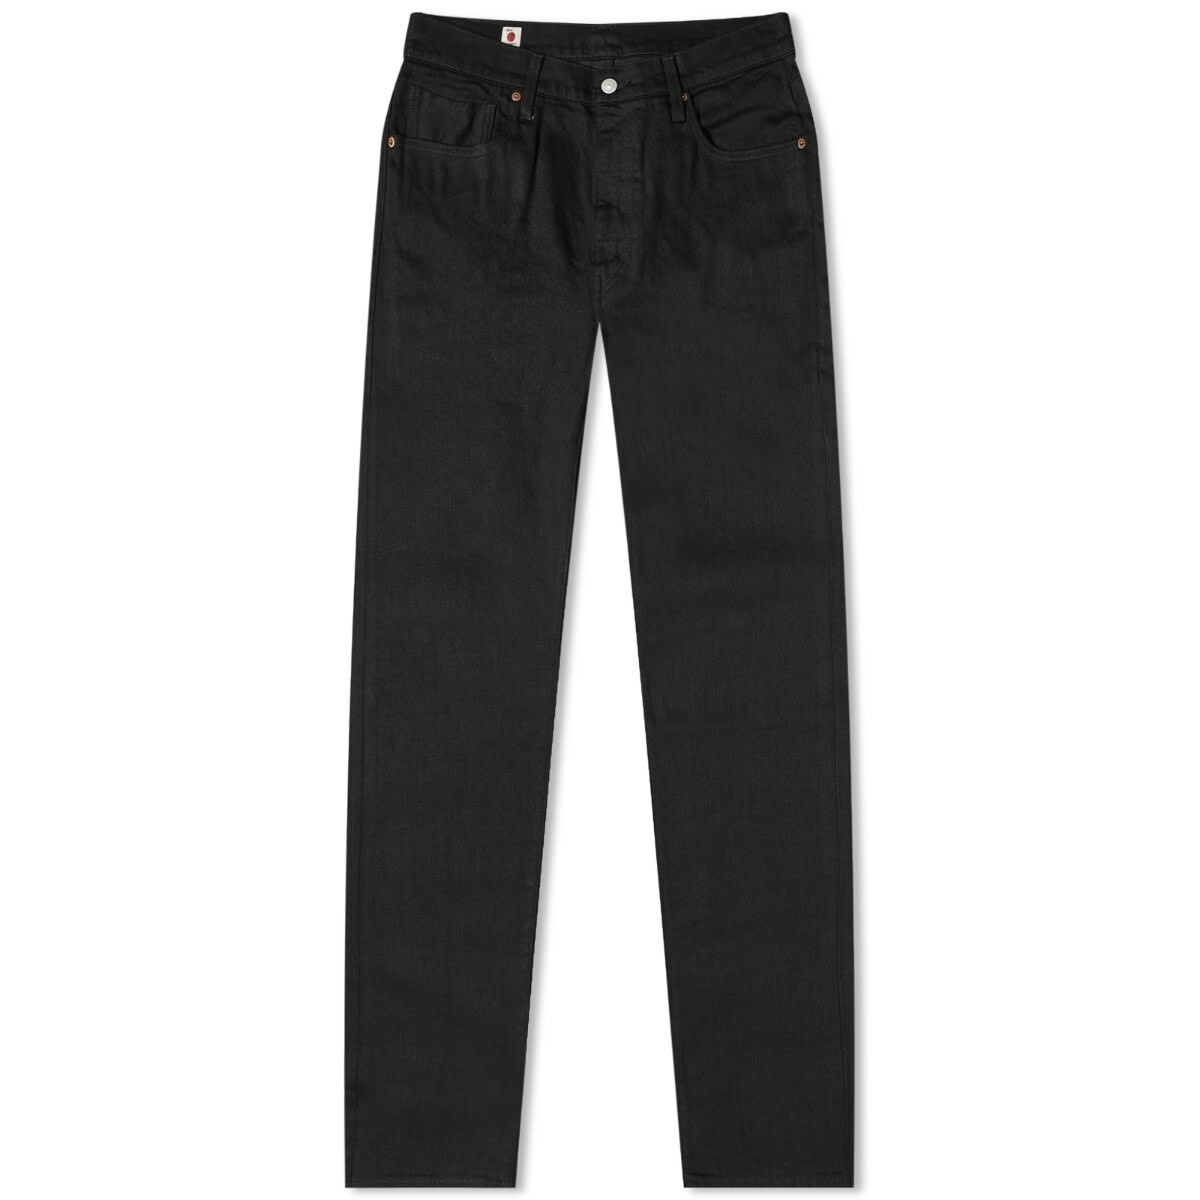 Photo: Levi’s Collections Men's Levis Vintage Clothing MIJ 512 Slim Taper Jeans in Black Rinse